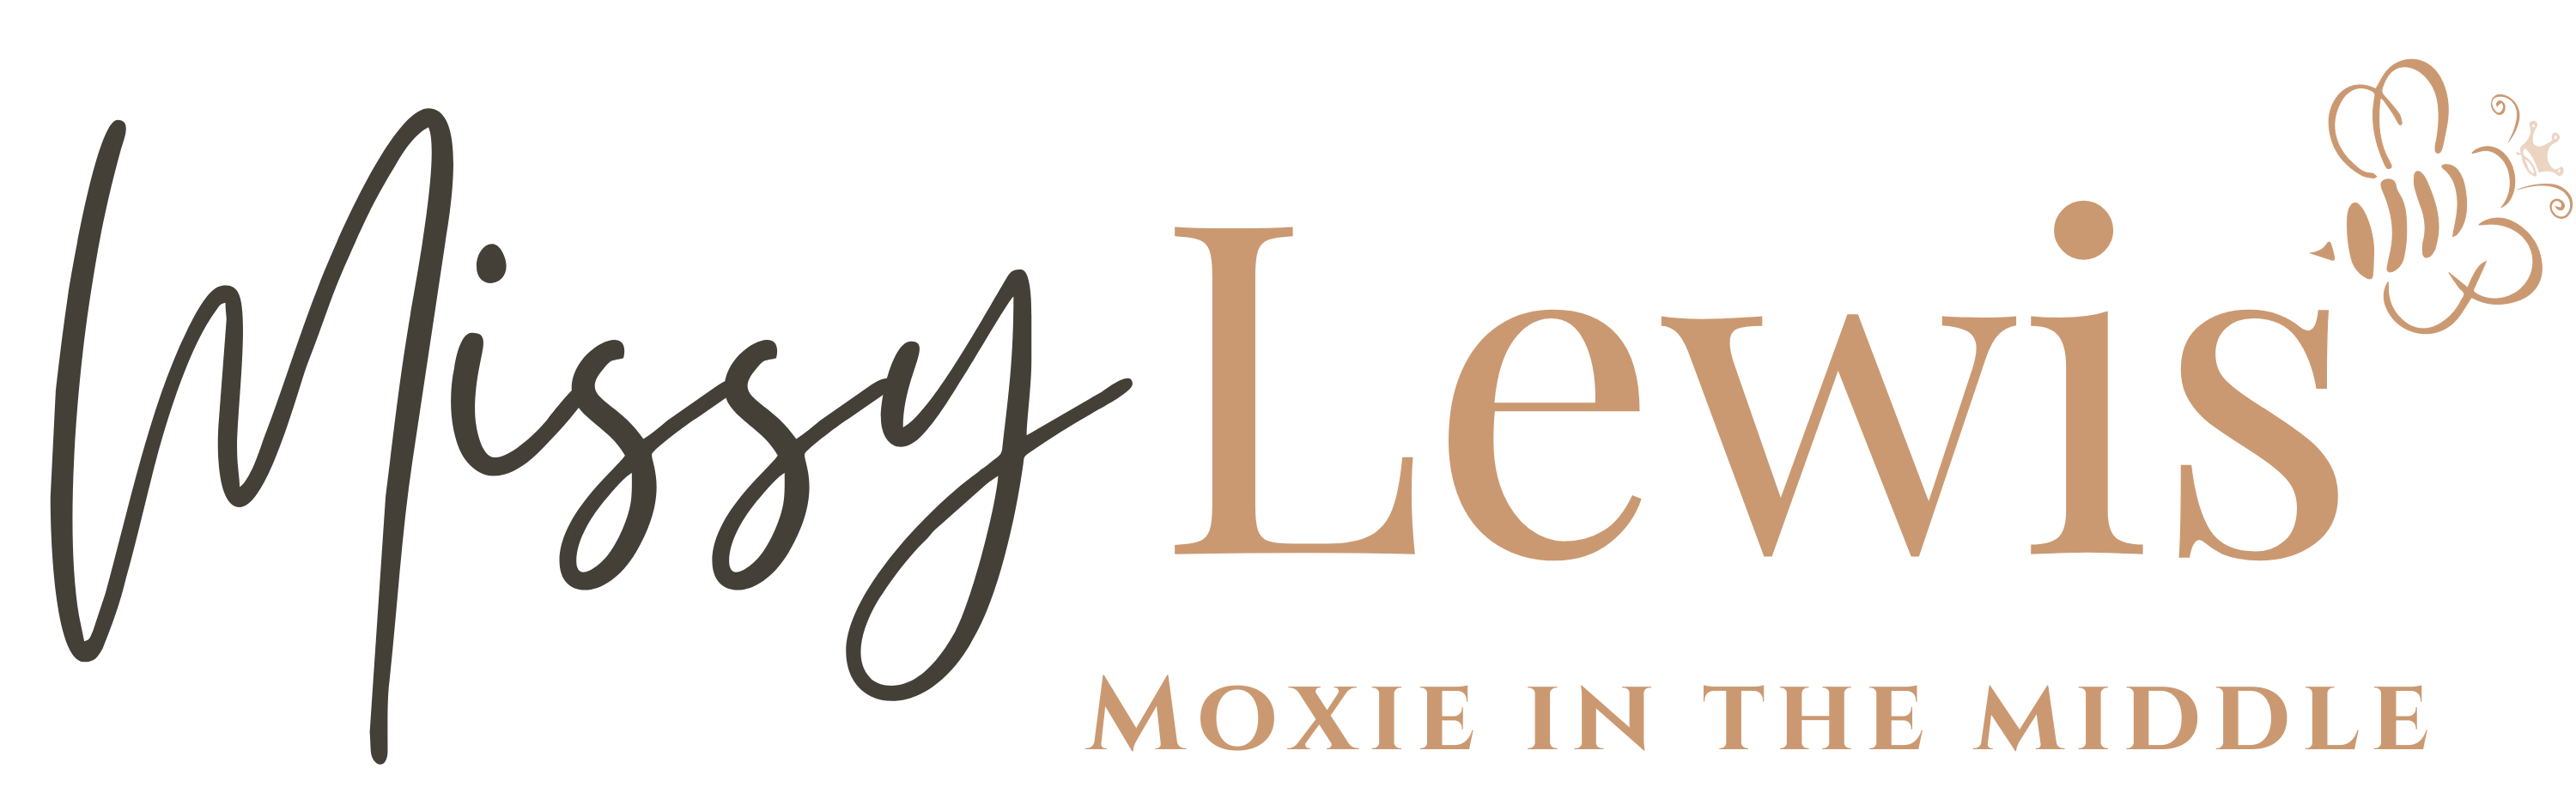 Missy Lewis - Moxie in the Middle